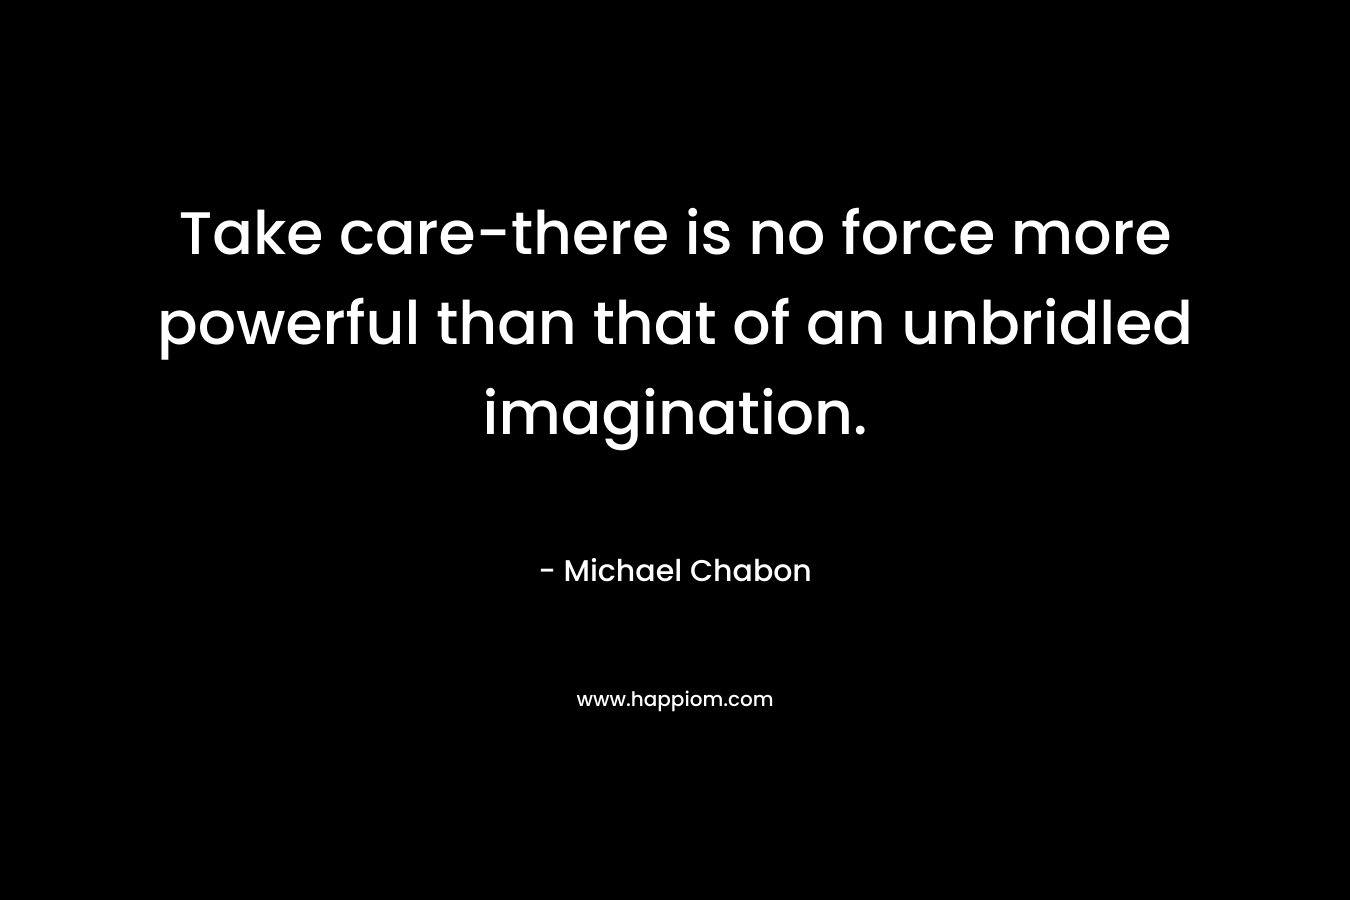 Take care-there is no force more powerful than that of an unbridled imagination.